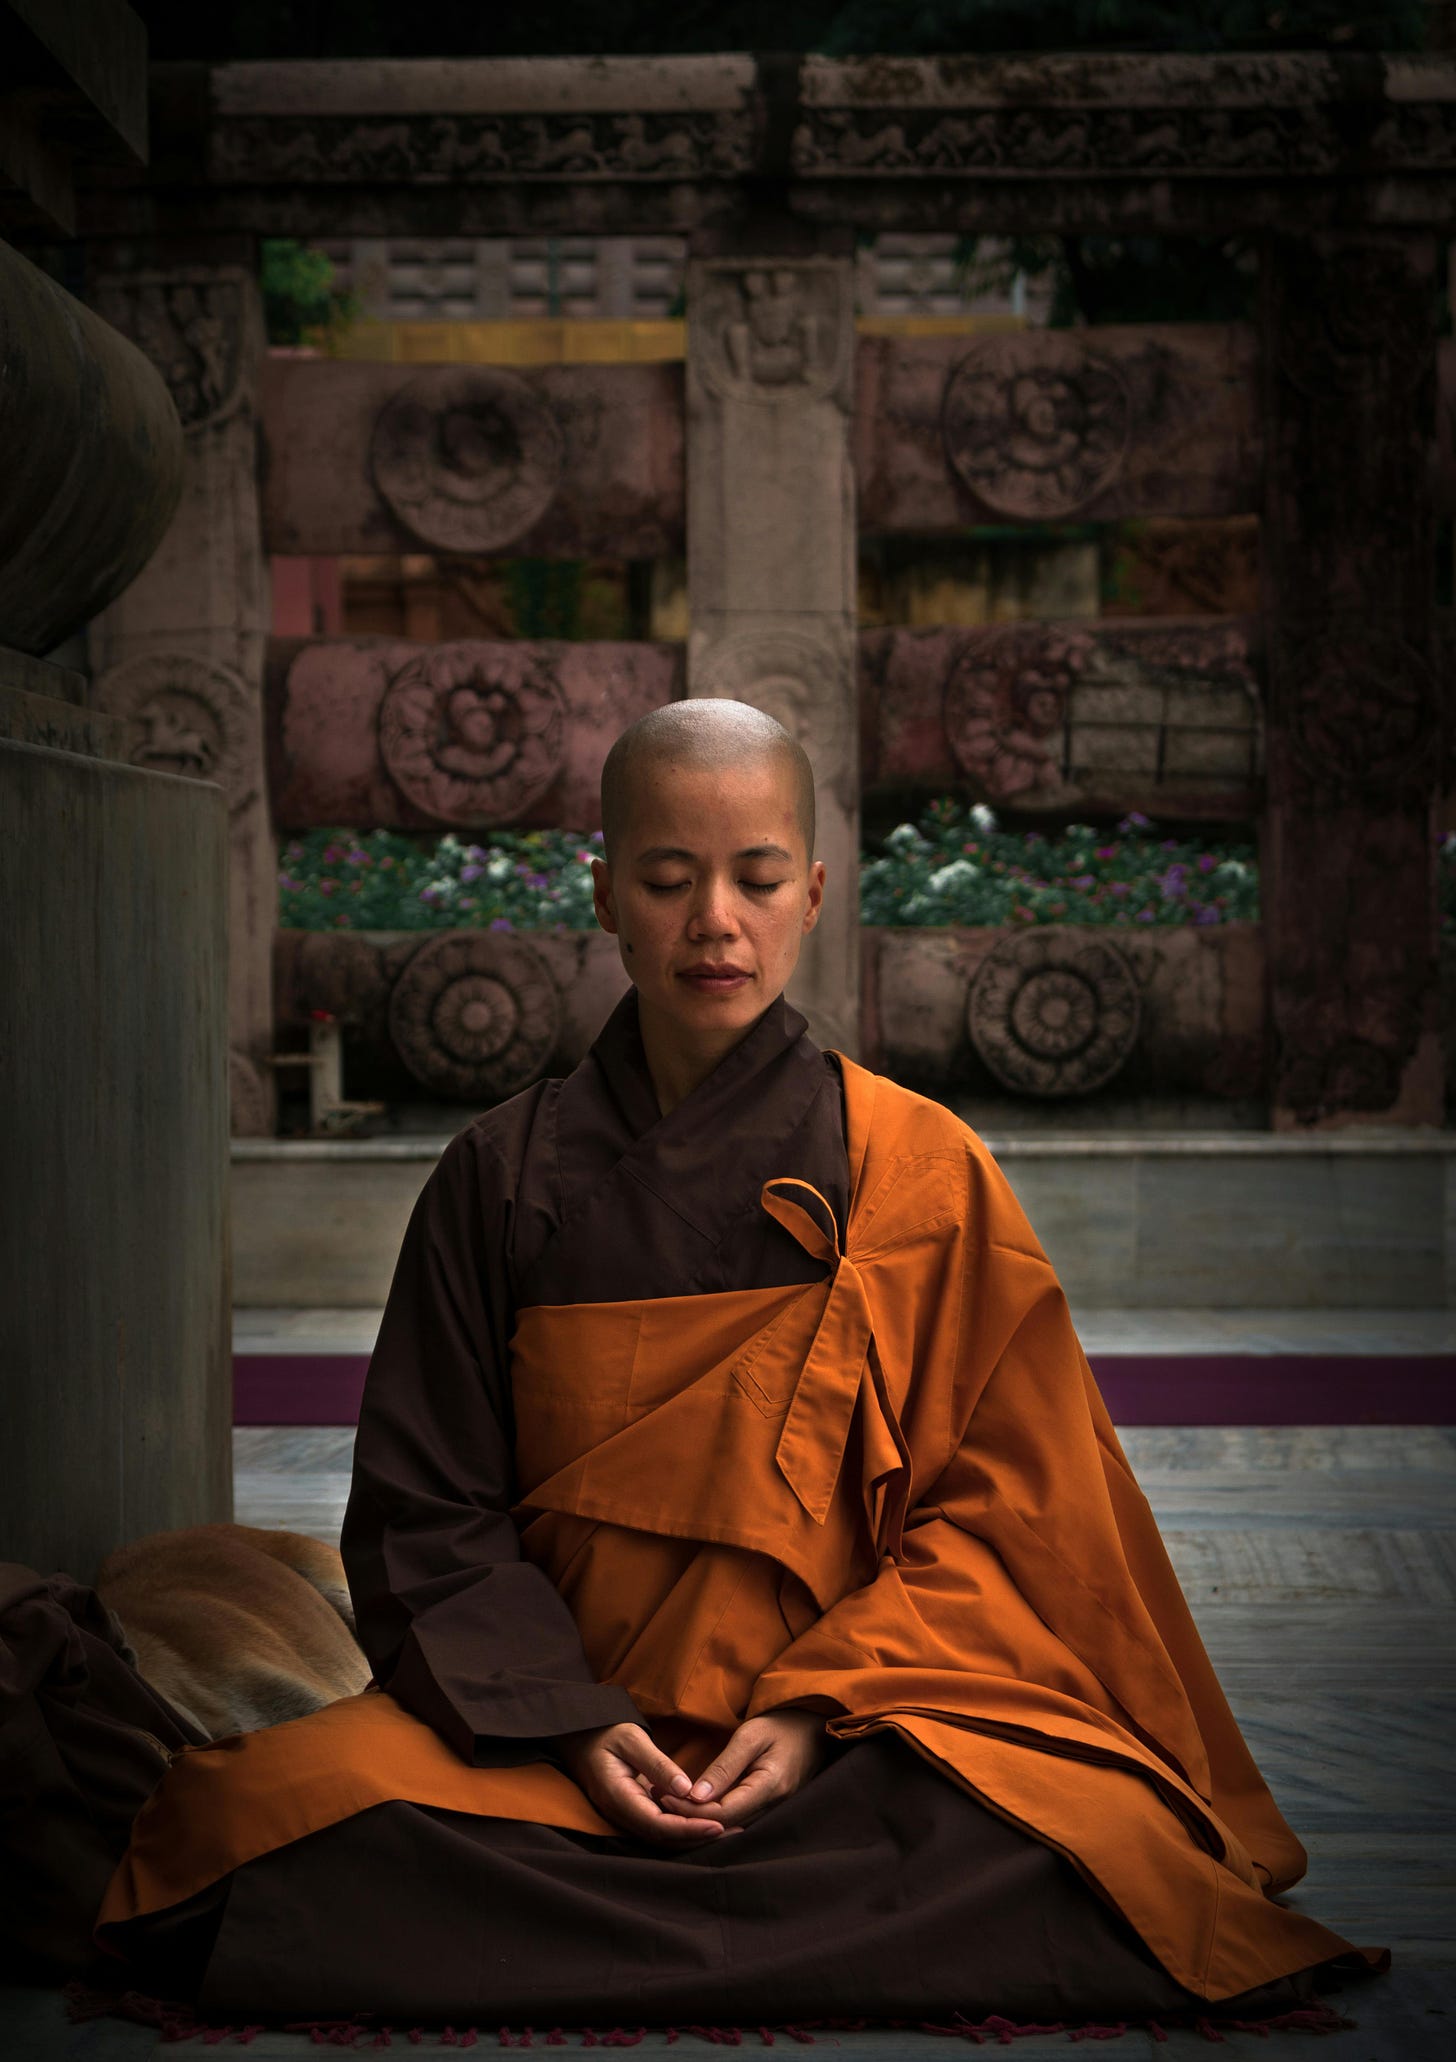 Buddhist monk with shaved head sitting in a position implying that they are meditating.